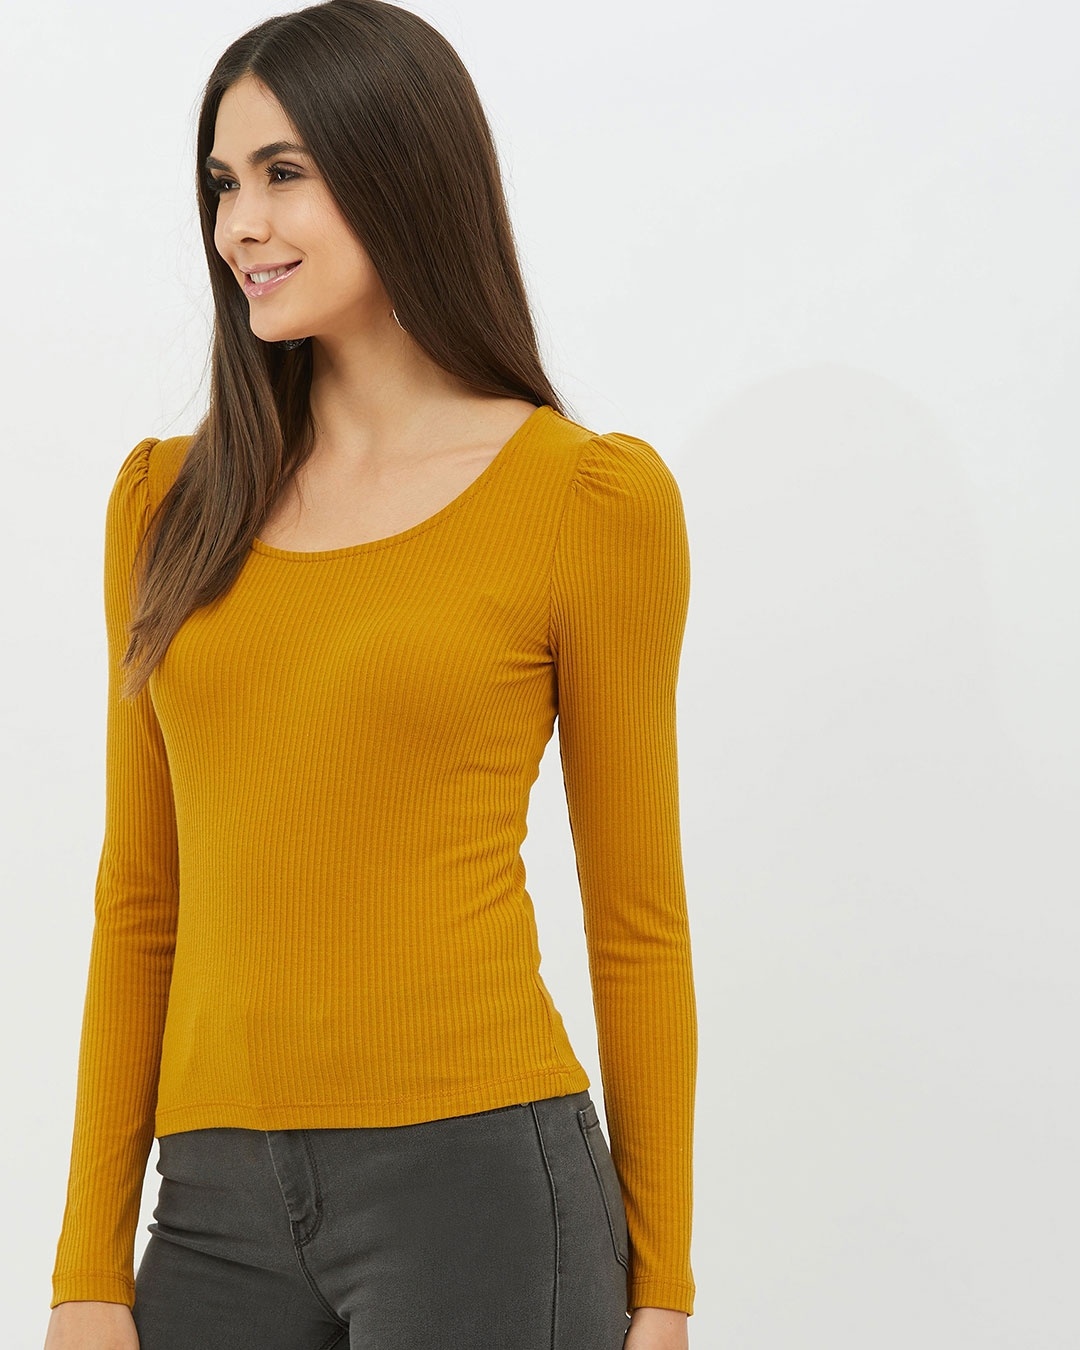 Shop Women Round Neck Full Sleeve Solid Top-Full